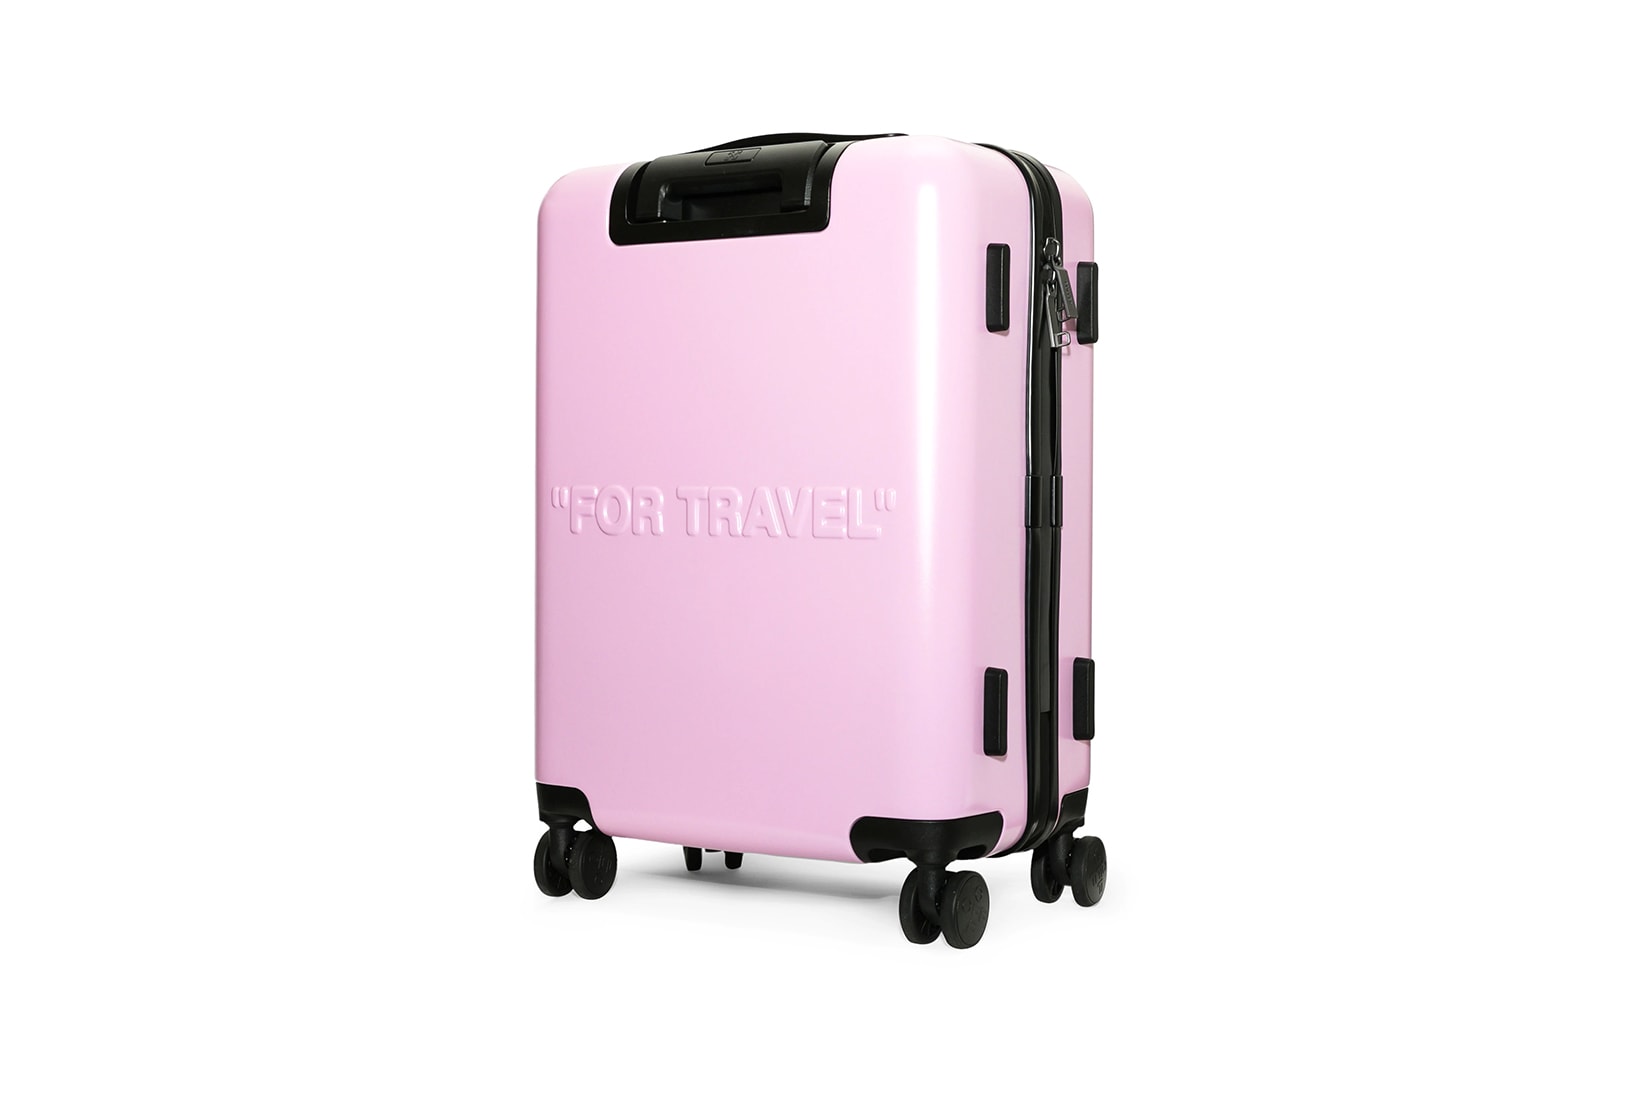 off white for travel arrow trolley luggage suitcase pink designer bags